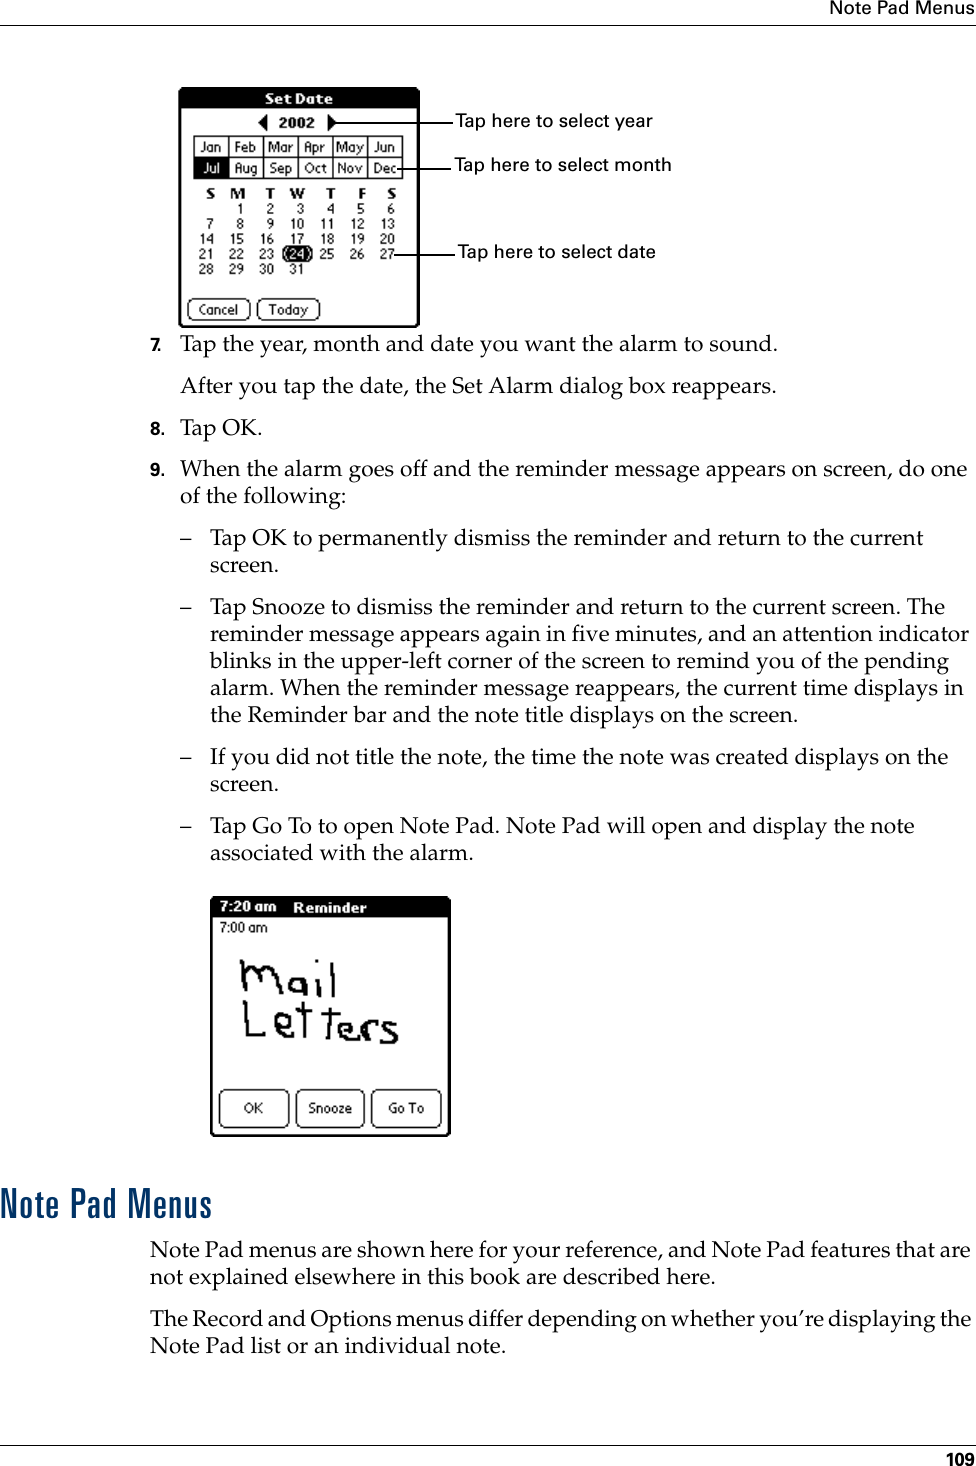 Note Pad Menus1097. Tap the year, month and date you want the alarm to sound.After you tap the date, the Set Alarm dialog box reappears.8. Tap OK.9. When the alarm goes off and the reminder message appears on screen, do one of the following:– Tap OK to permanently dismiss the reminder and return to the current screen.– Tap Snooze to dismiss the reminder and return to the current screen. The reminder message appears again in five minutes, and an attention indicator blinks in the upper-left corner of the screen to remind you of the pending alarm. When the reminder message reappears, the current time displays in the Reminder bar and the note title displays on the screen. – If you did not title the note, the time the note was created displays on the screen.– Tap Go To to open Note Pad. Note Pad will open and display the note associated with the alarm.Note Pad MenusNote Pad menus are shown here for your reference, and Note Pad features that are not explained elsewhere in this book are described here.The Record and Options menus differ depending on whether you’re displaying the Note Pad list or an individual note.Tap here to select monthTap here to select yearTap here to select date